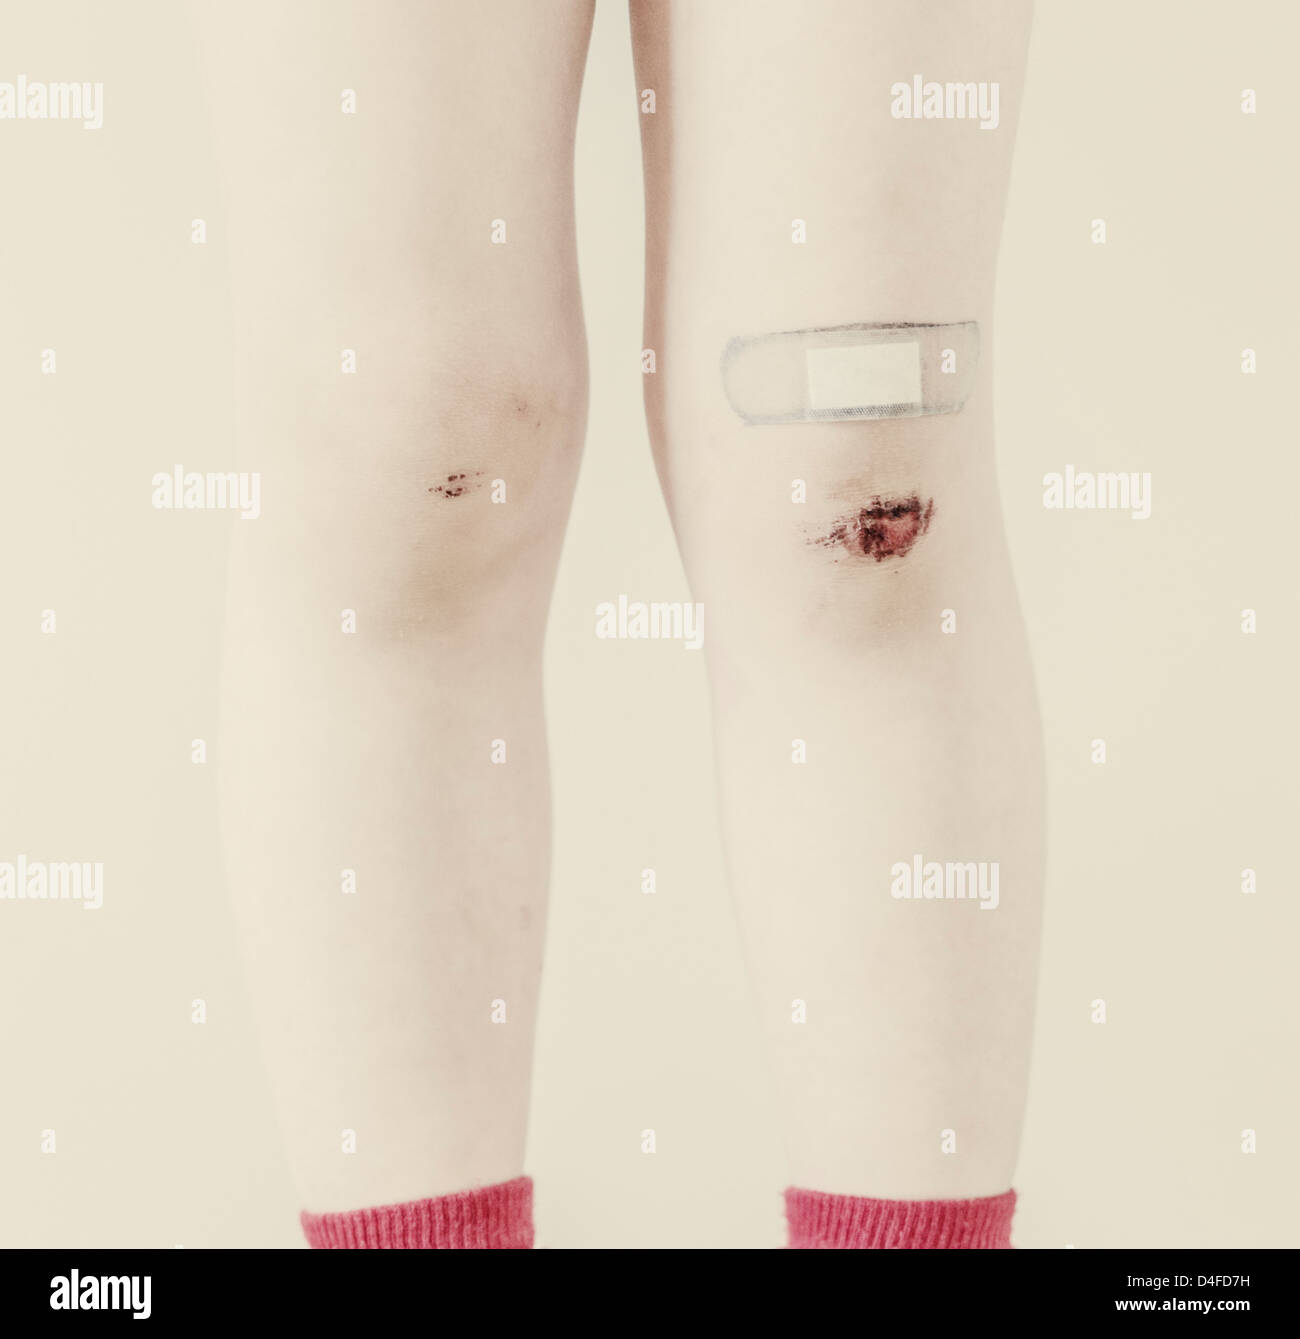 Closeup of the legs of a young child with bruises and bandaid Stock Photo